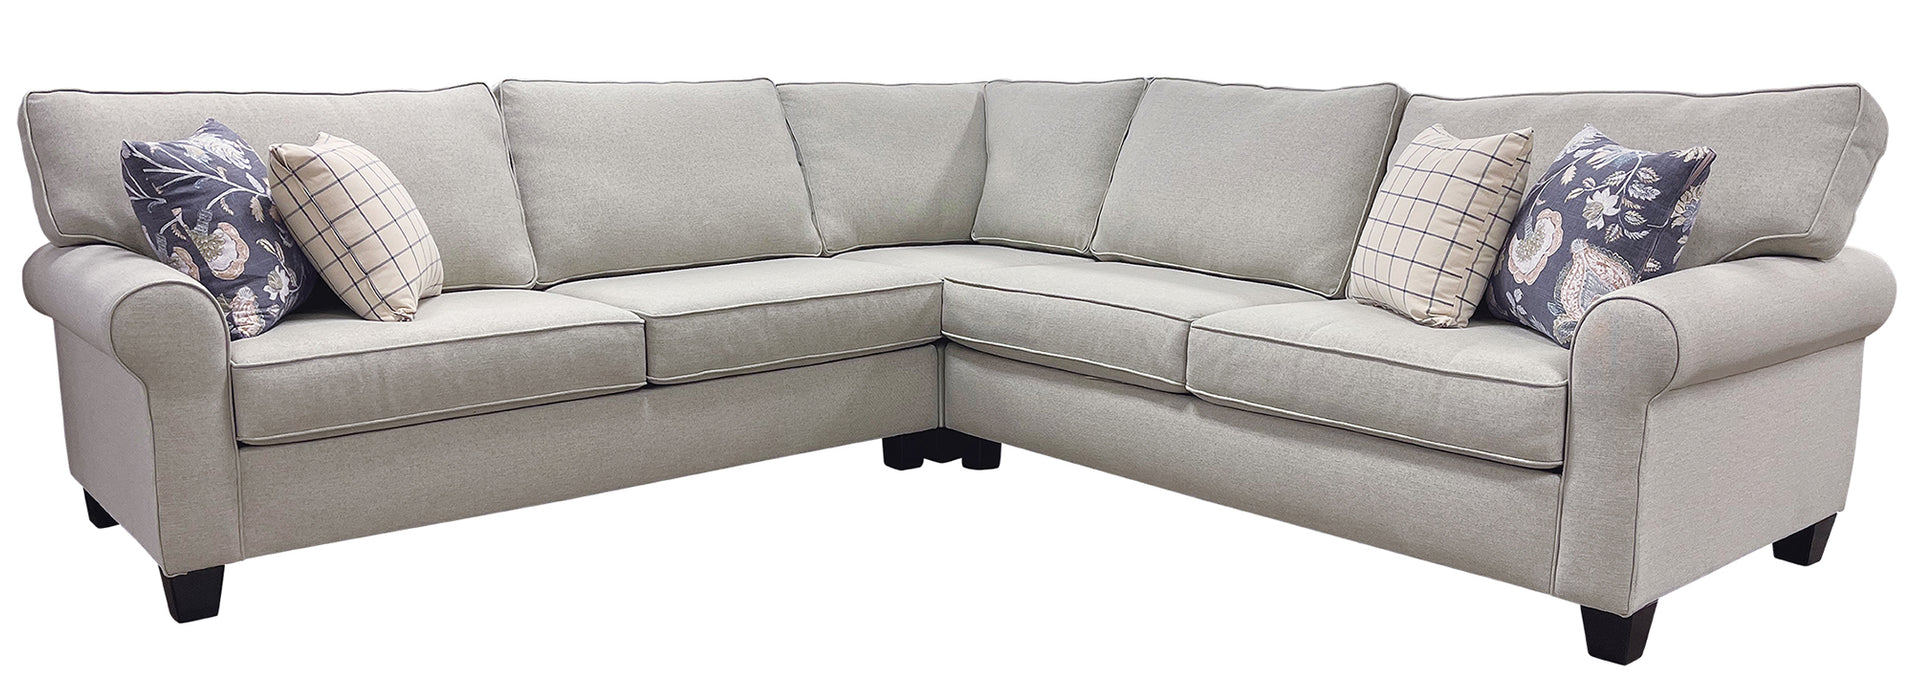 Mariano Italian Leather Furniture - Charlotte Sectional in Bronte Graphite - 1004-30L-30R